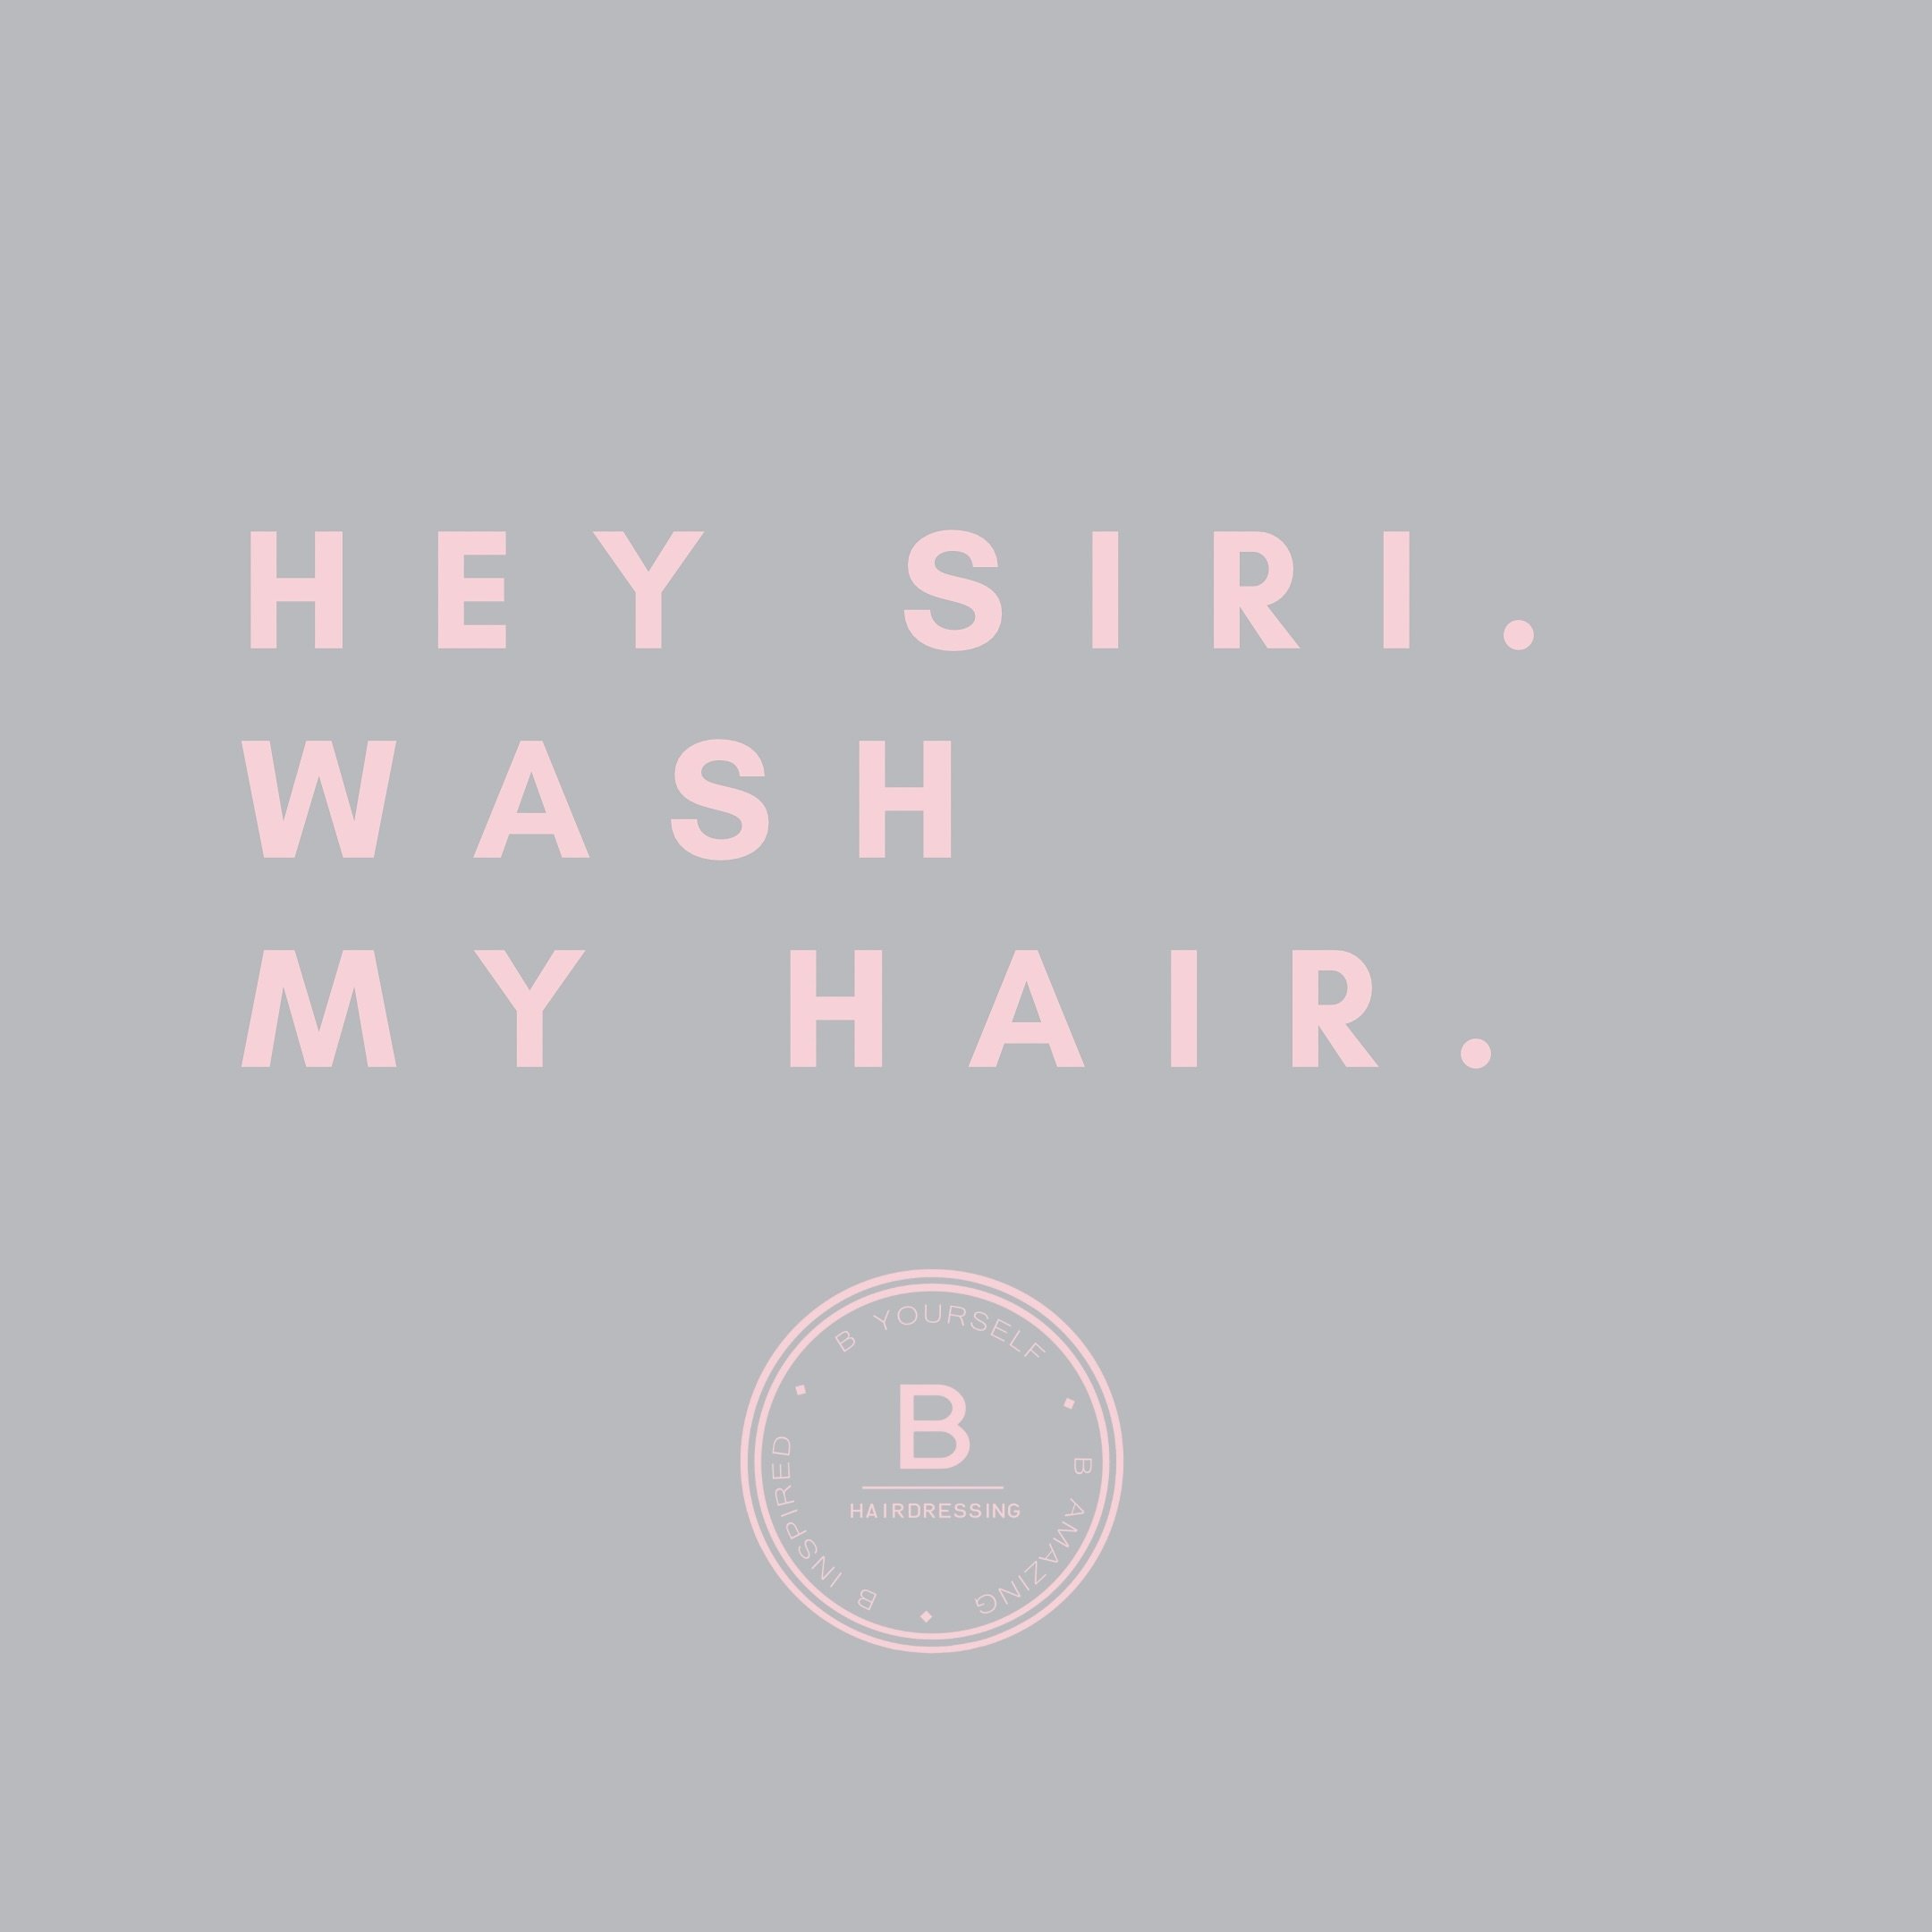 If only!! Book your appointment now and let&rsquo;s make those locks shine! DM to schedule your next blow dry session! #HairGoals #BlowDryMagic ✨&rdquo;